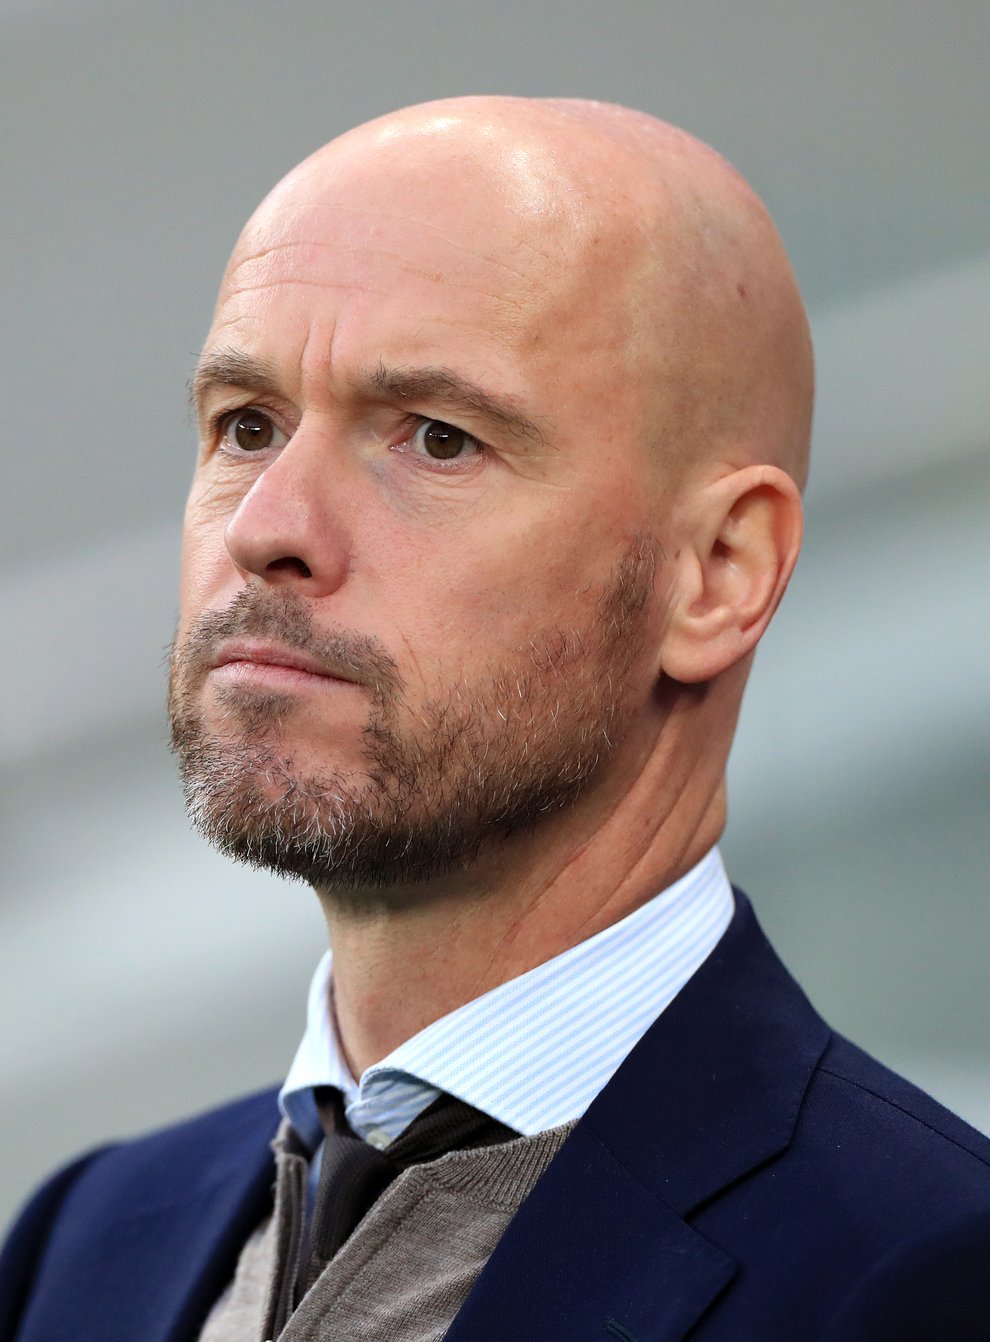 Erik ten Hag will take over at Old Trafford this summer (Mike Egerton/PA)